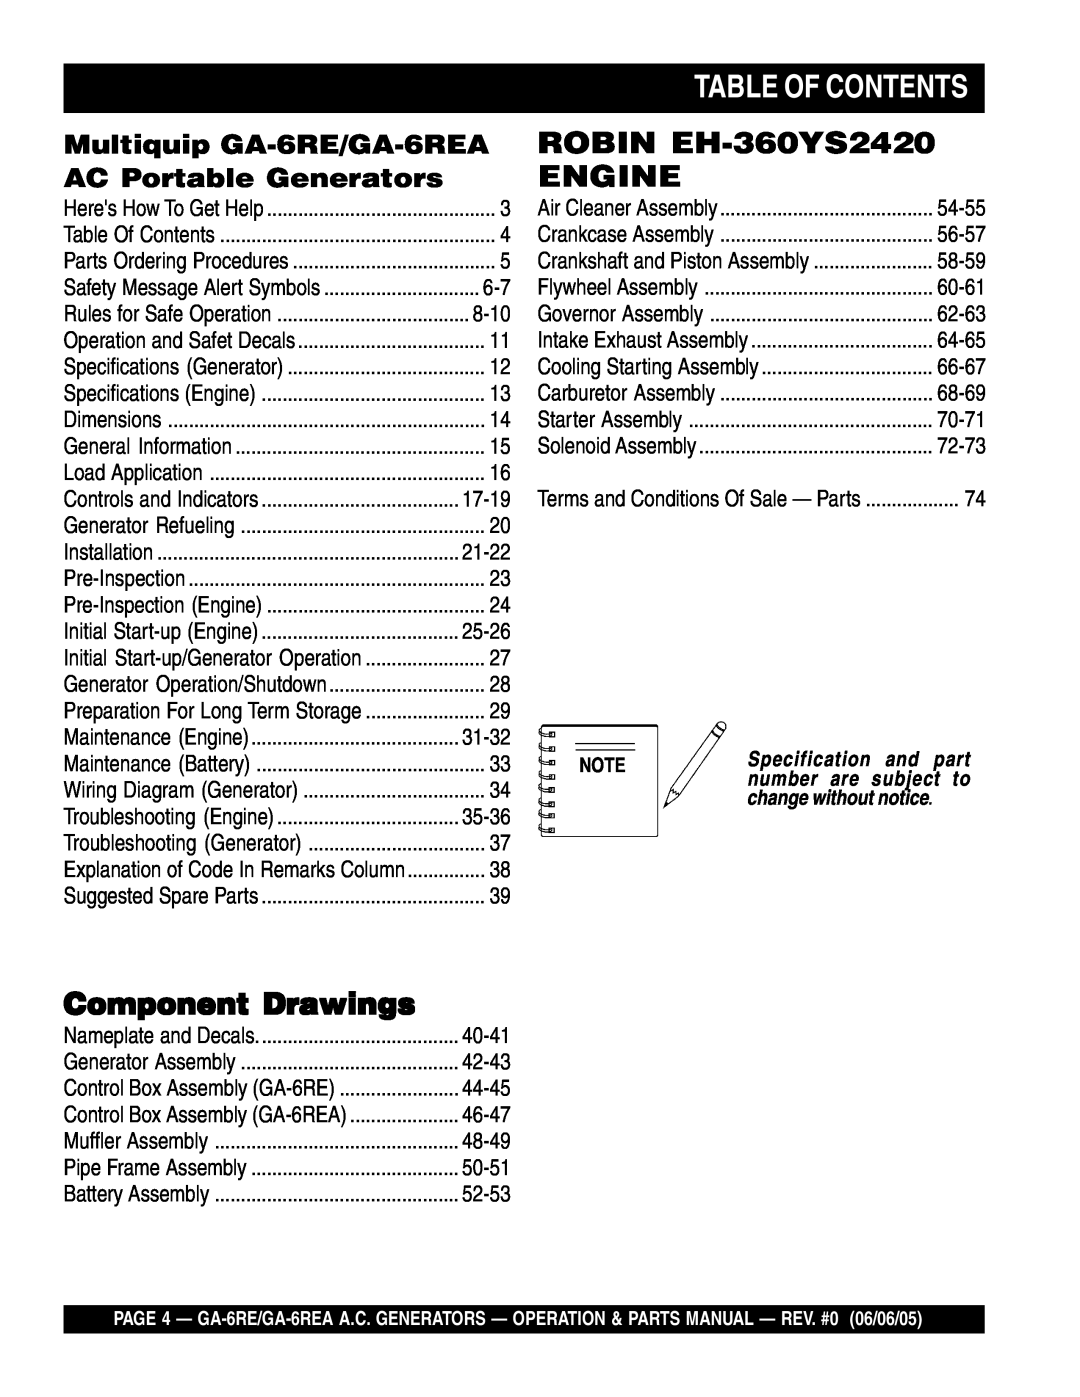 Multiquip manual Table Of Contents, ROBIN EH-360YS2420 ENGINE, Component Drawings, Multiquip GA-6RE/GA-6REA 